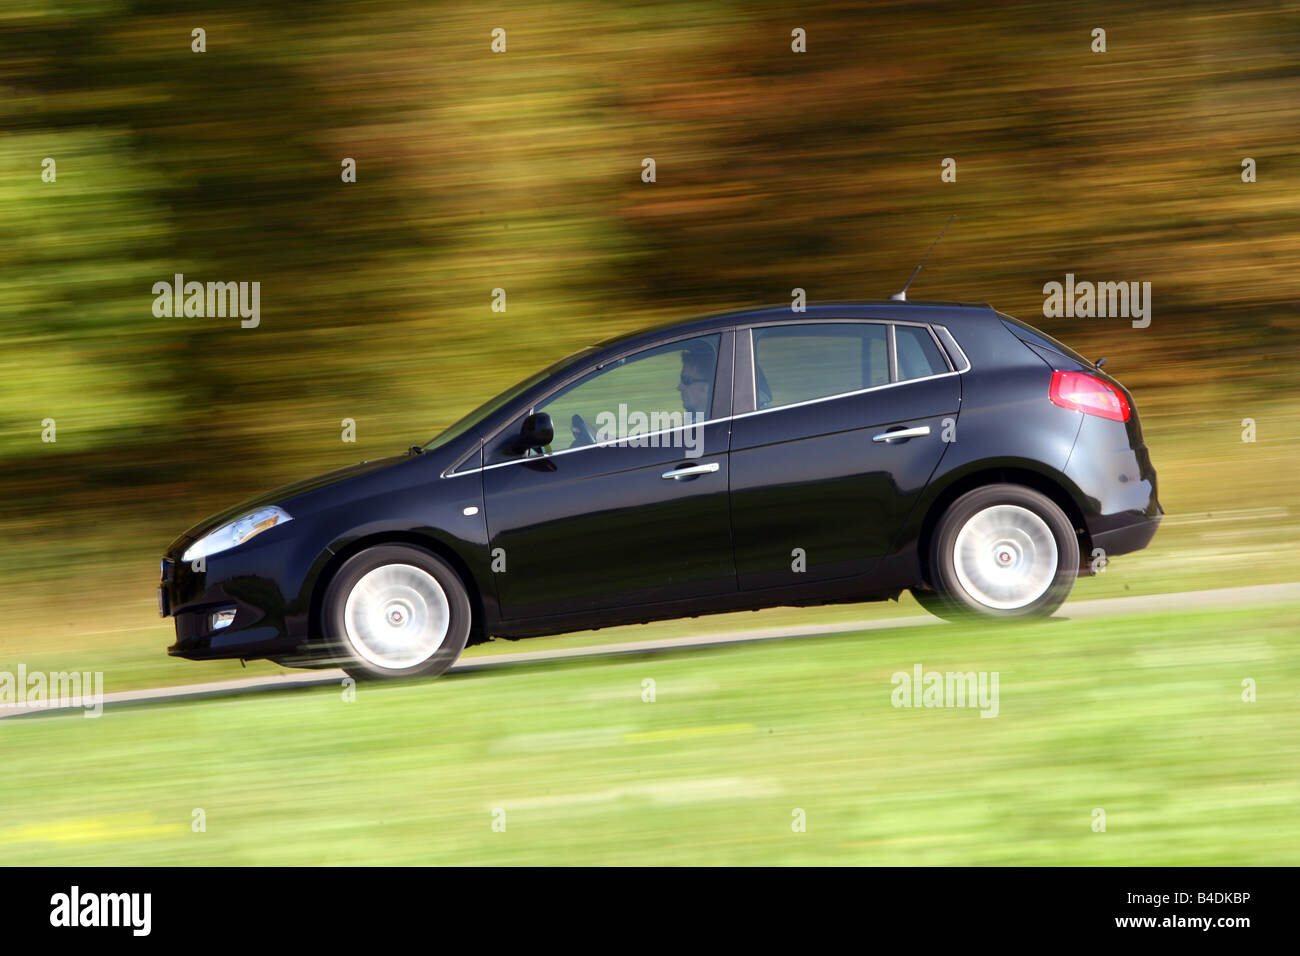 Fiat Bravo 1.4 T-Jet 16V Emotion, model year 2007-, black, driving, side view, country road Stock Photo